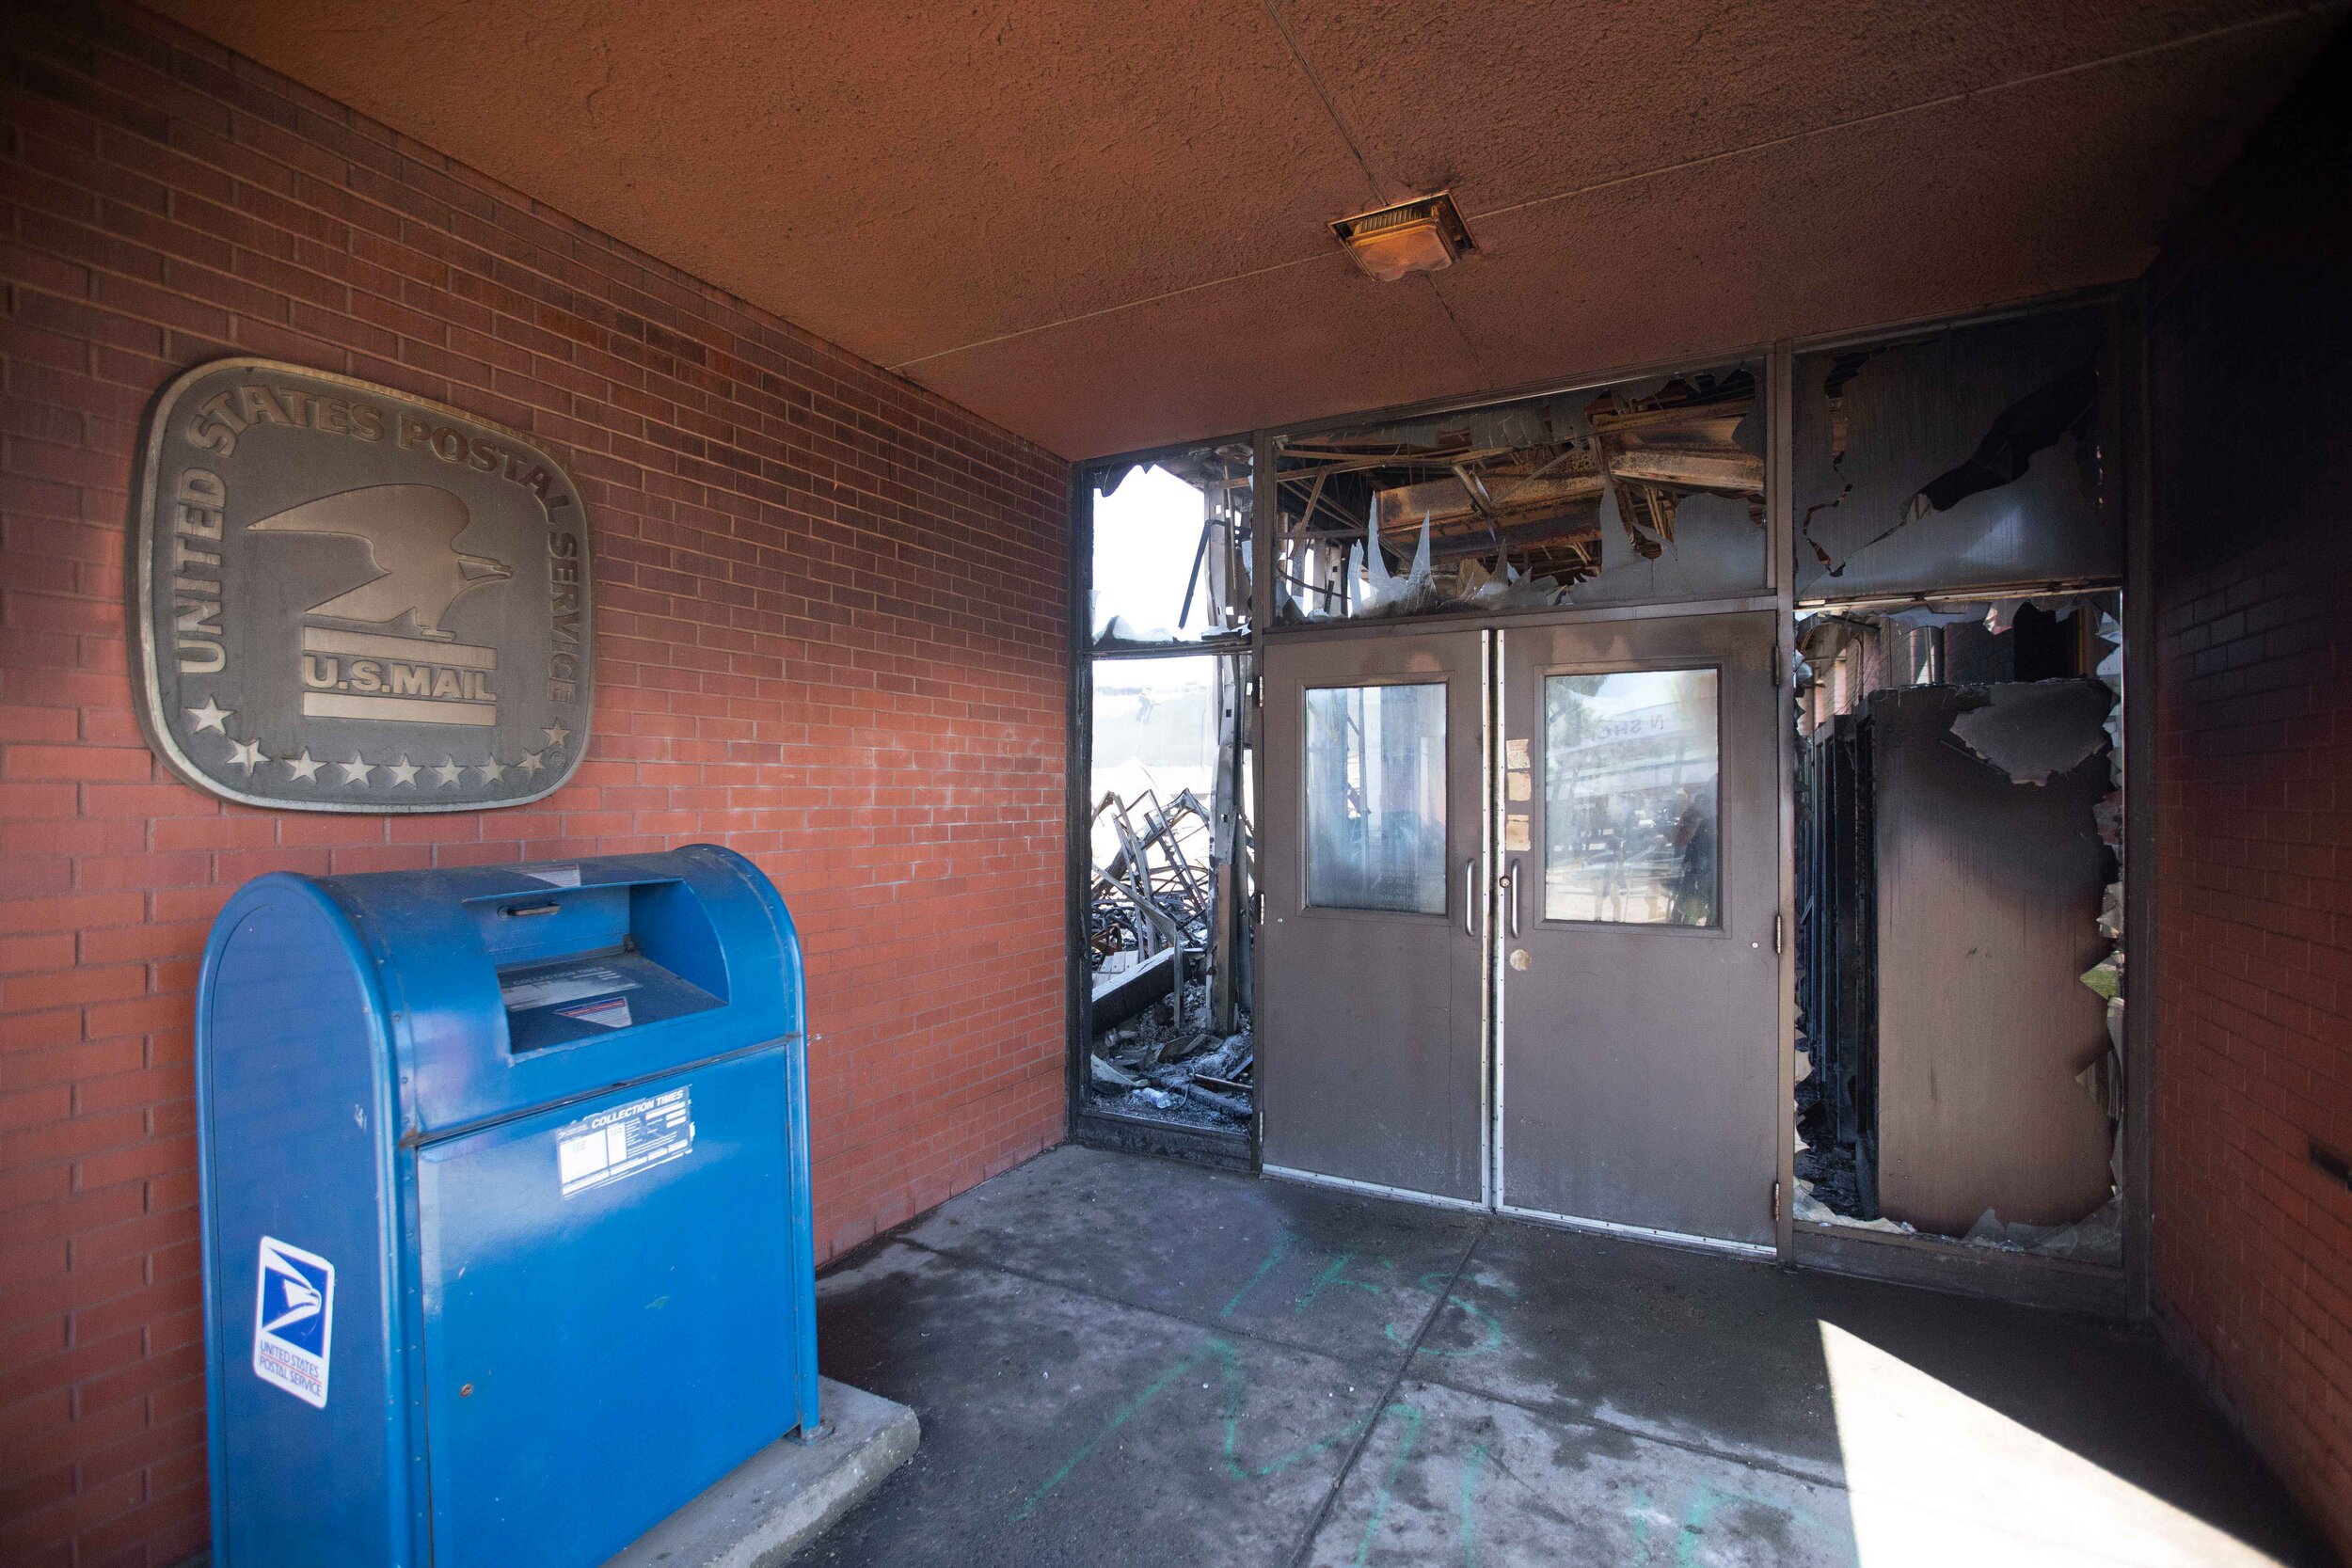  The entrance to a burned out postal offfive sits untouched by a fire that took most of the building out after riots broke out in Minneapolis, Minnesota over the police killing of George Floyd on May 30, 2020. Chris Juhn/Zuma. 